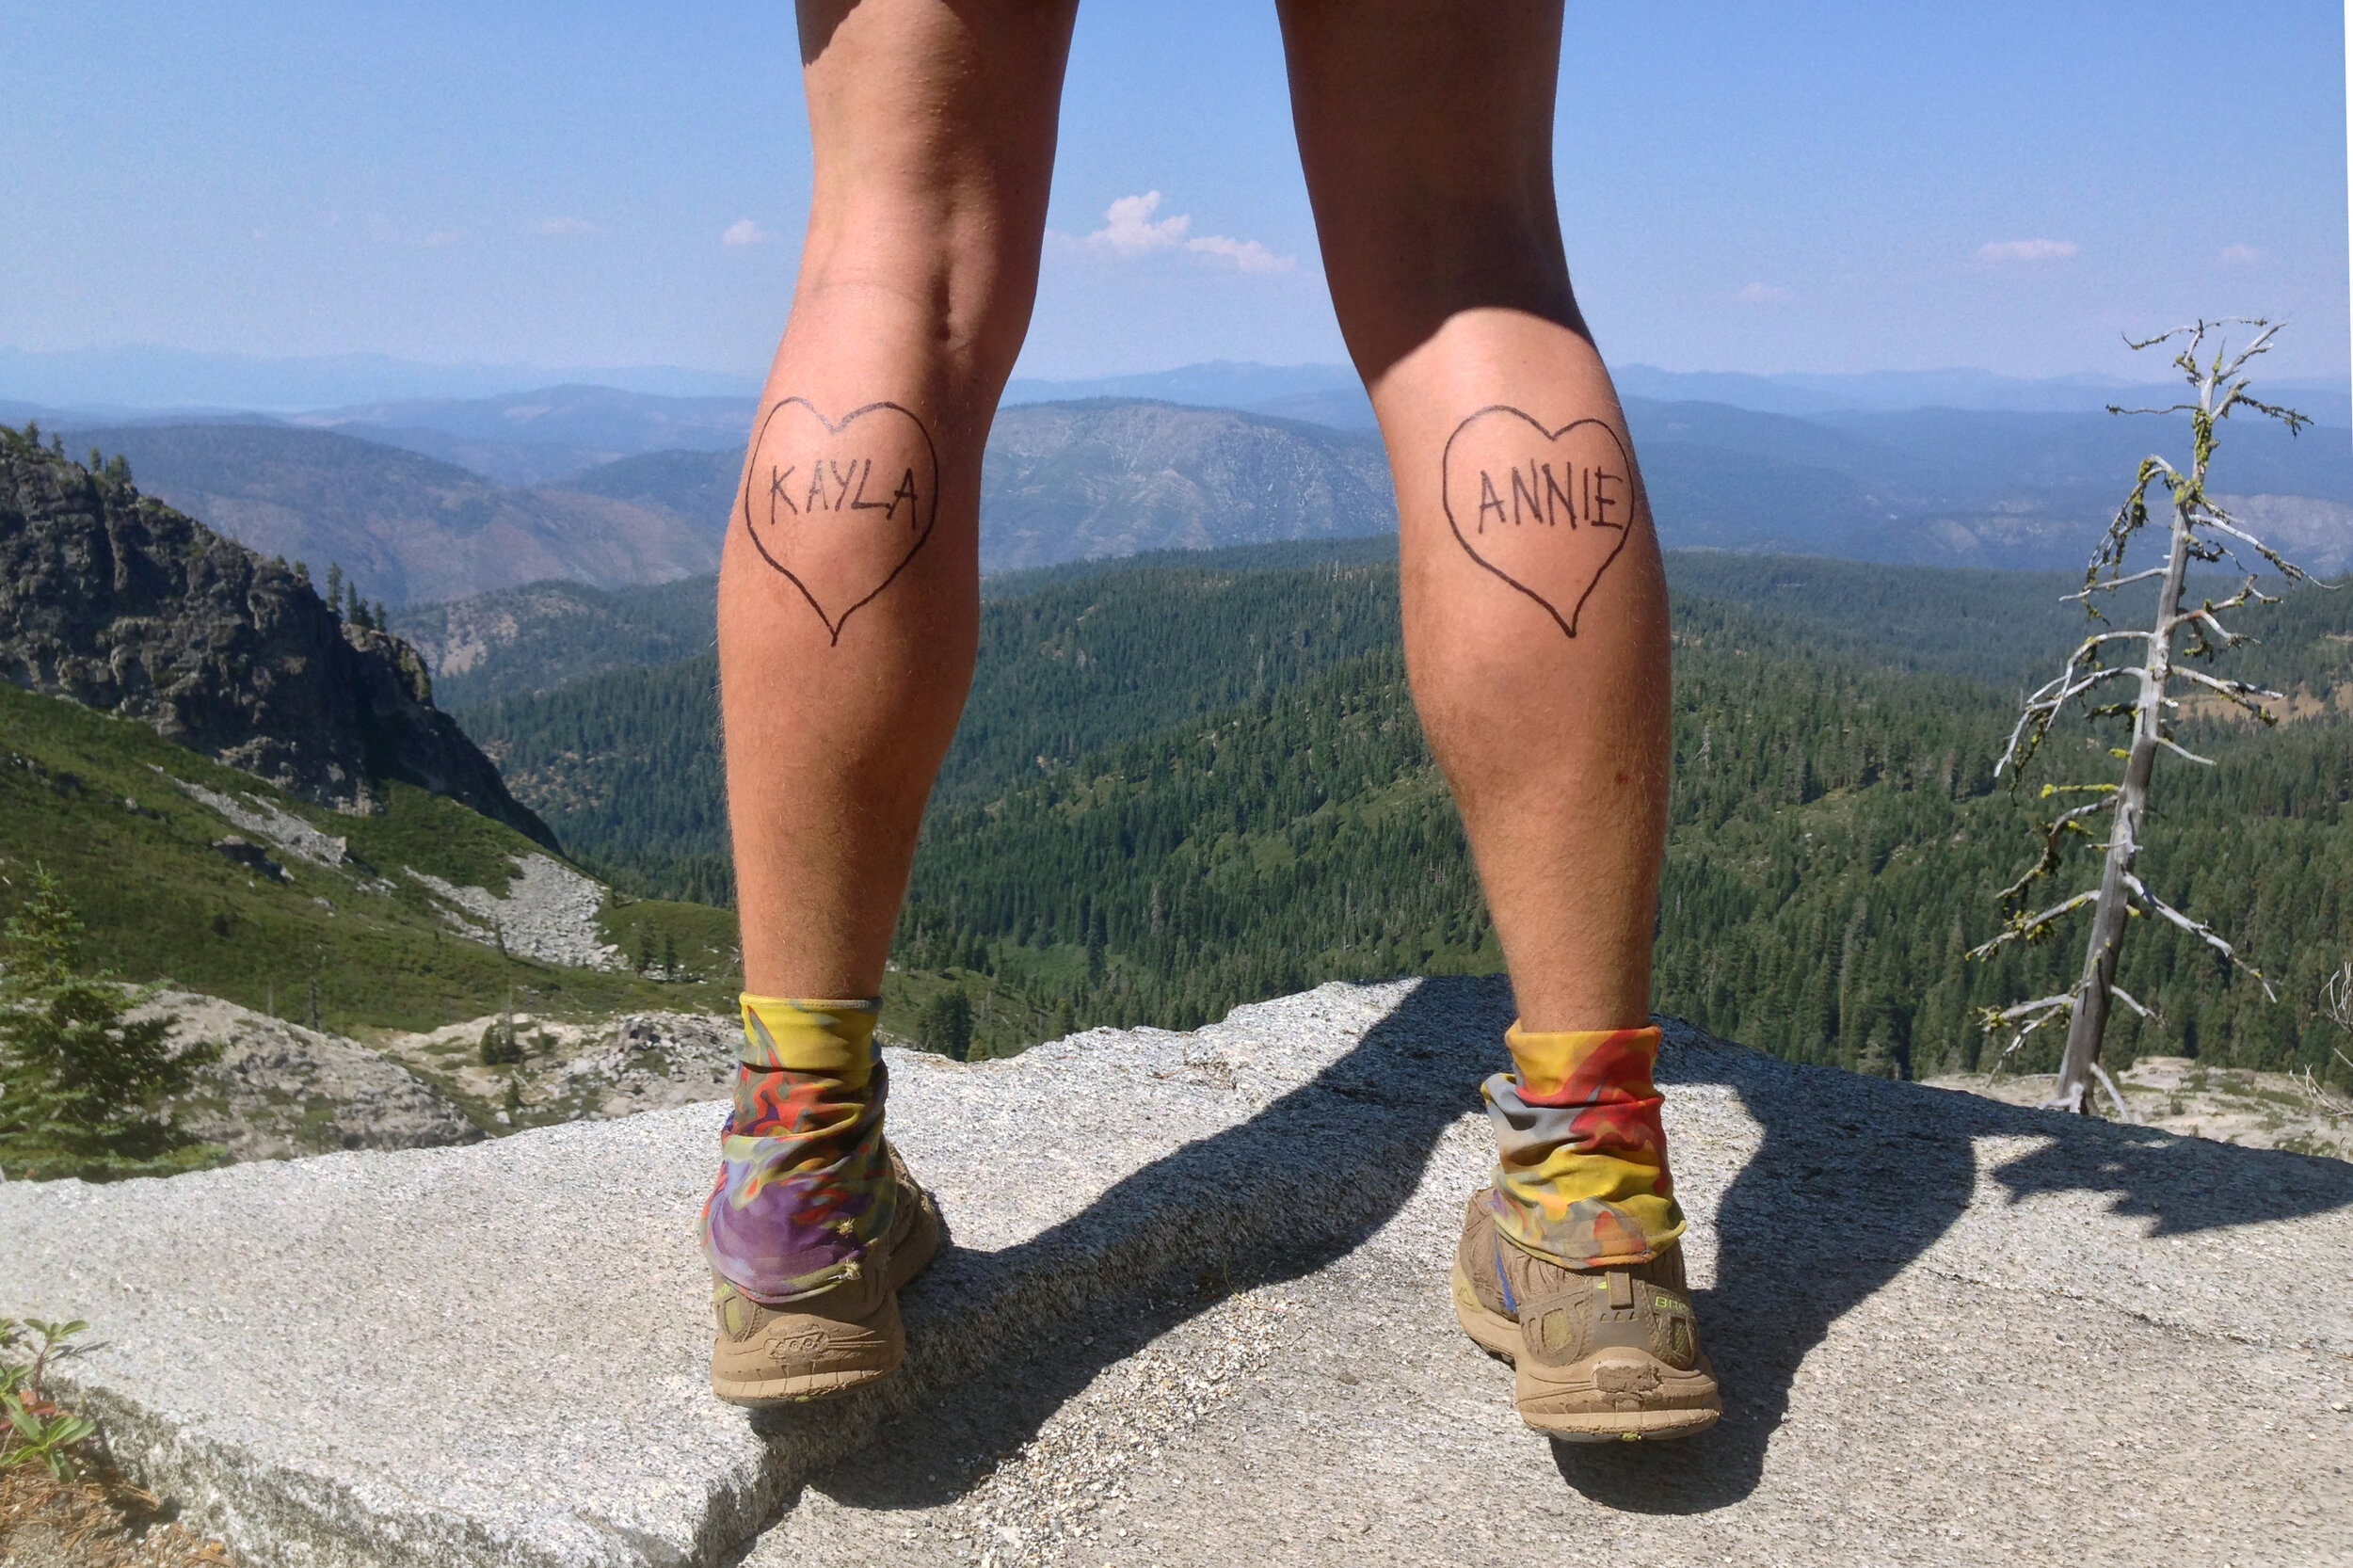 a backpacker flexes for a photo to send home with fake tattoos of the names of loved ones on her calves